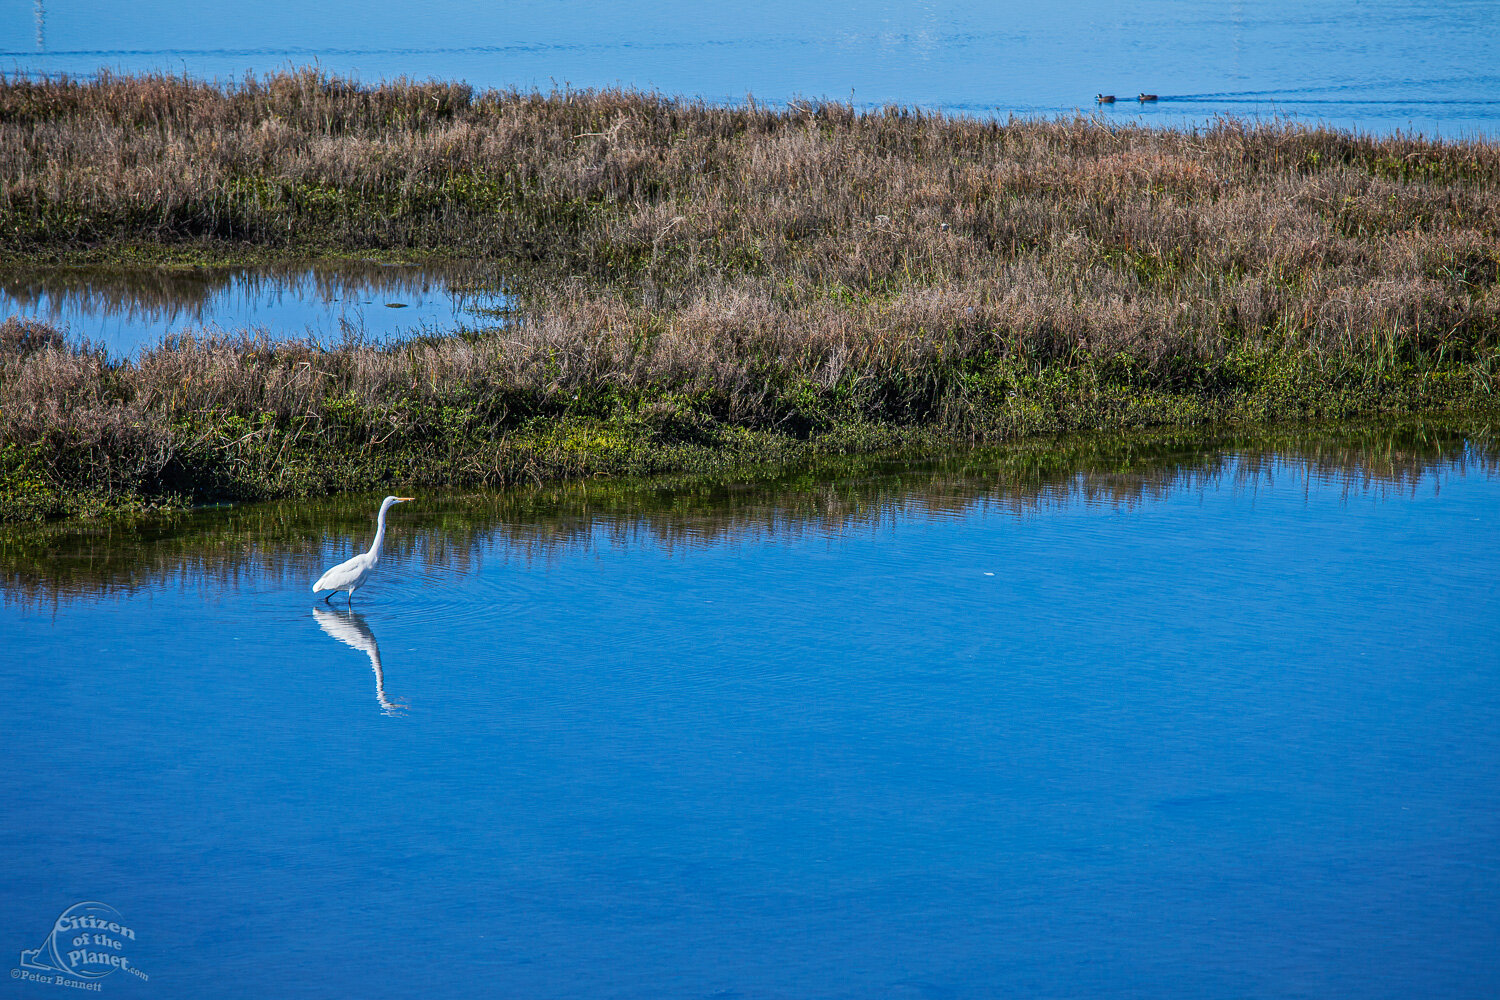  A Great Egret in the shallows of Bolsa Bay.     